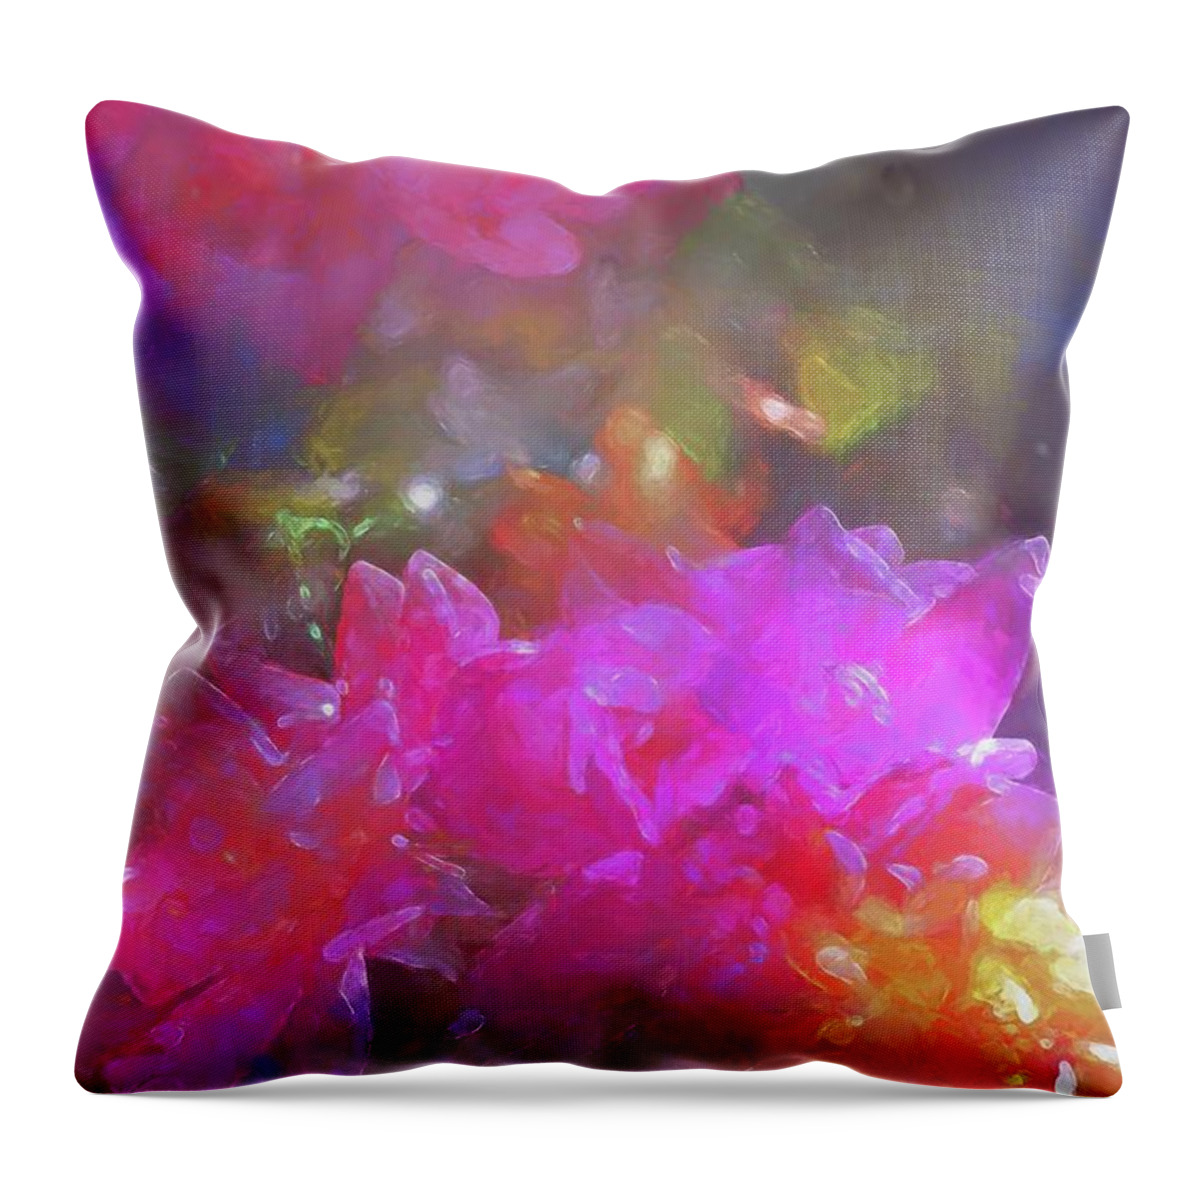 Floral Throw Pillow featuring the photograph Rose 250 by Pamela Cooper